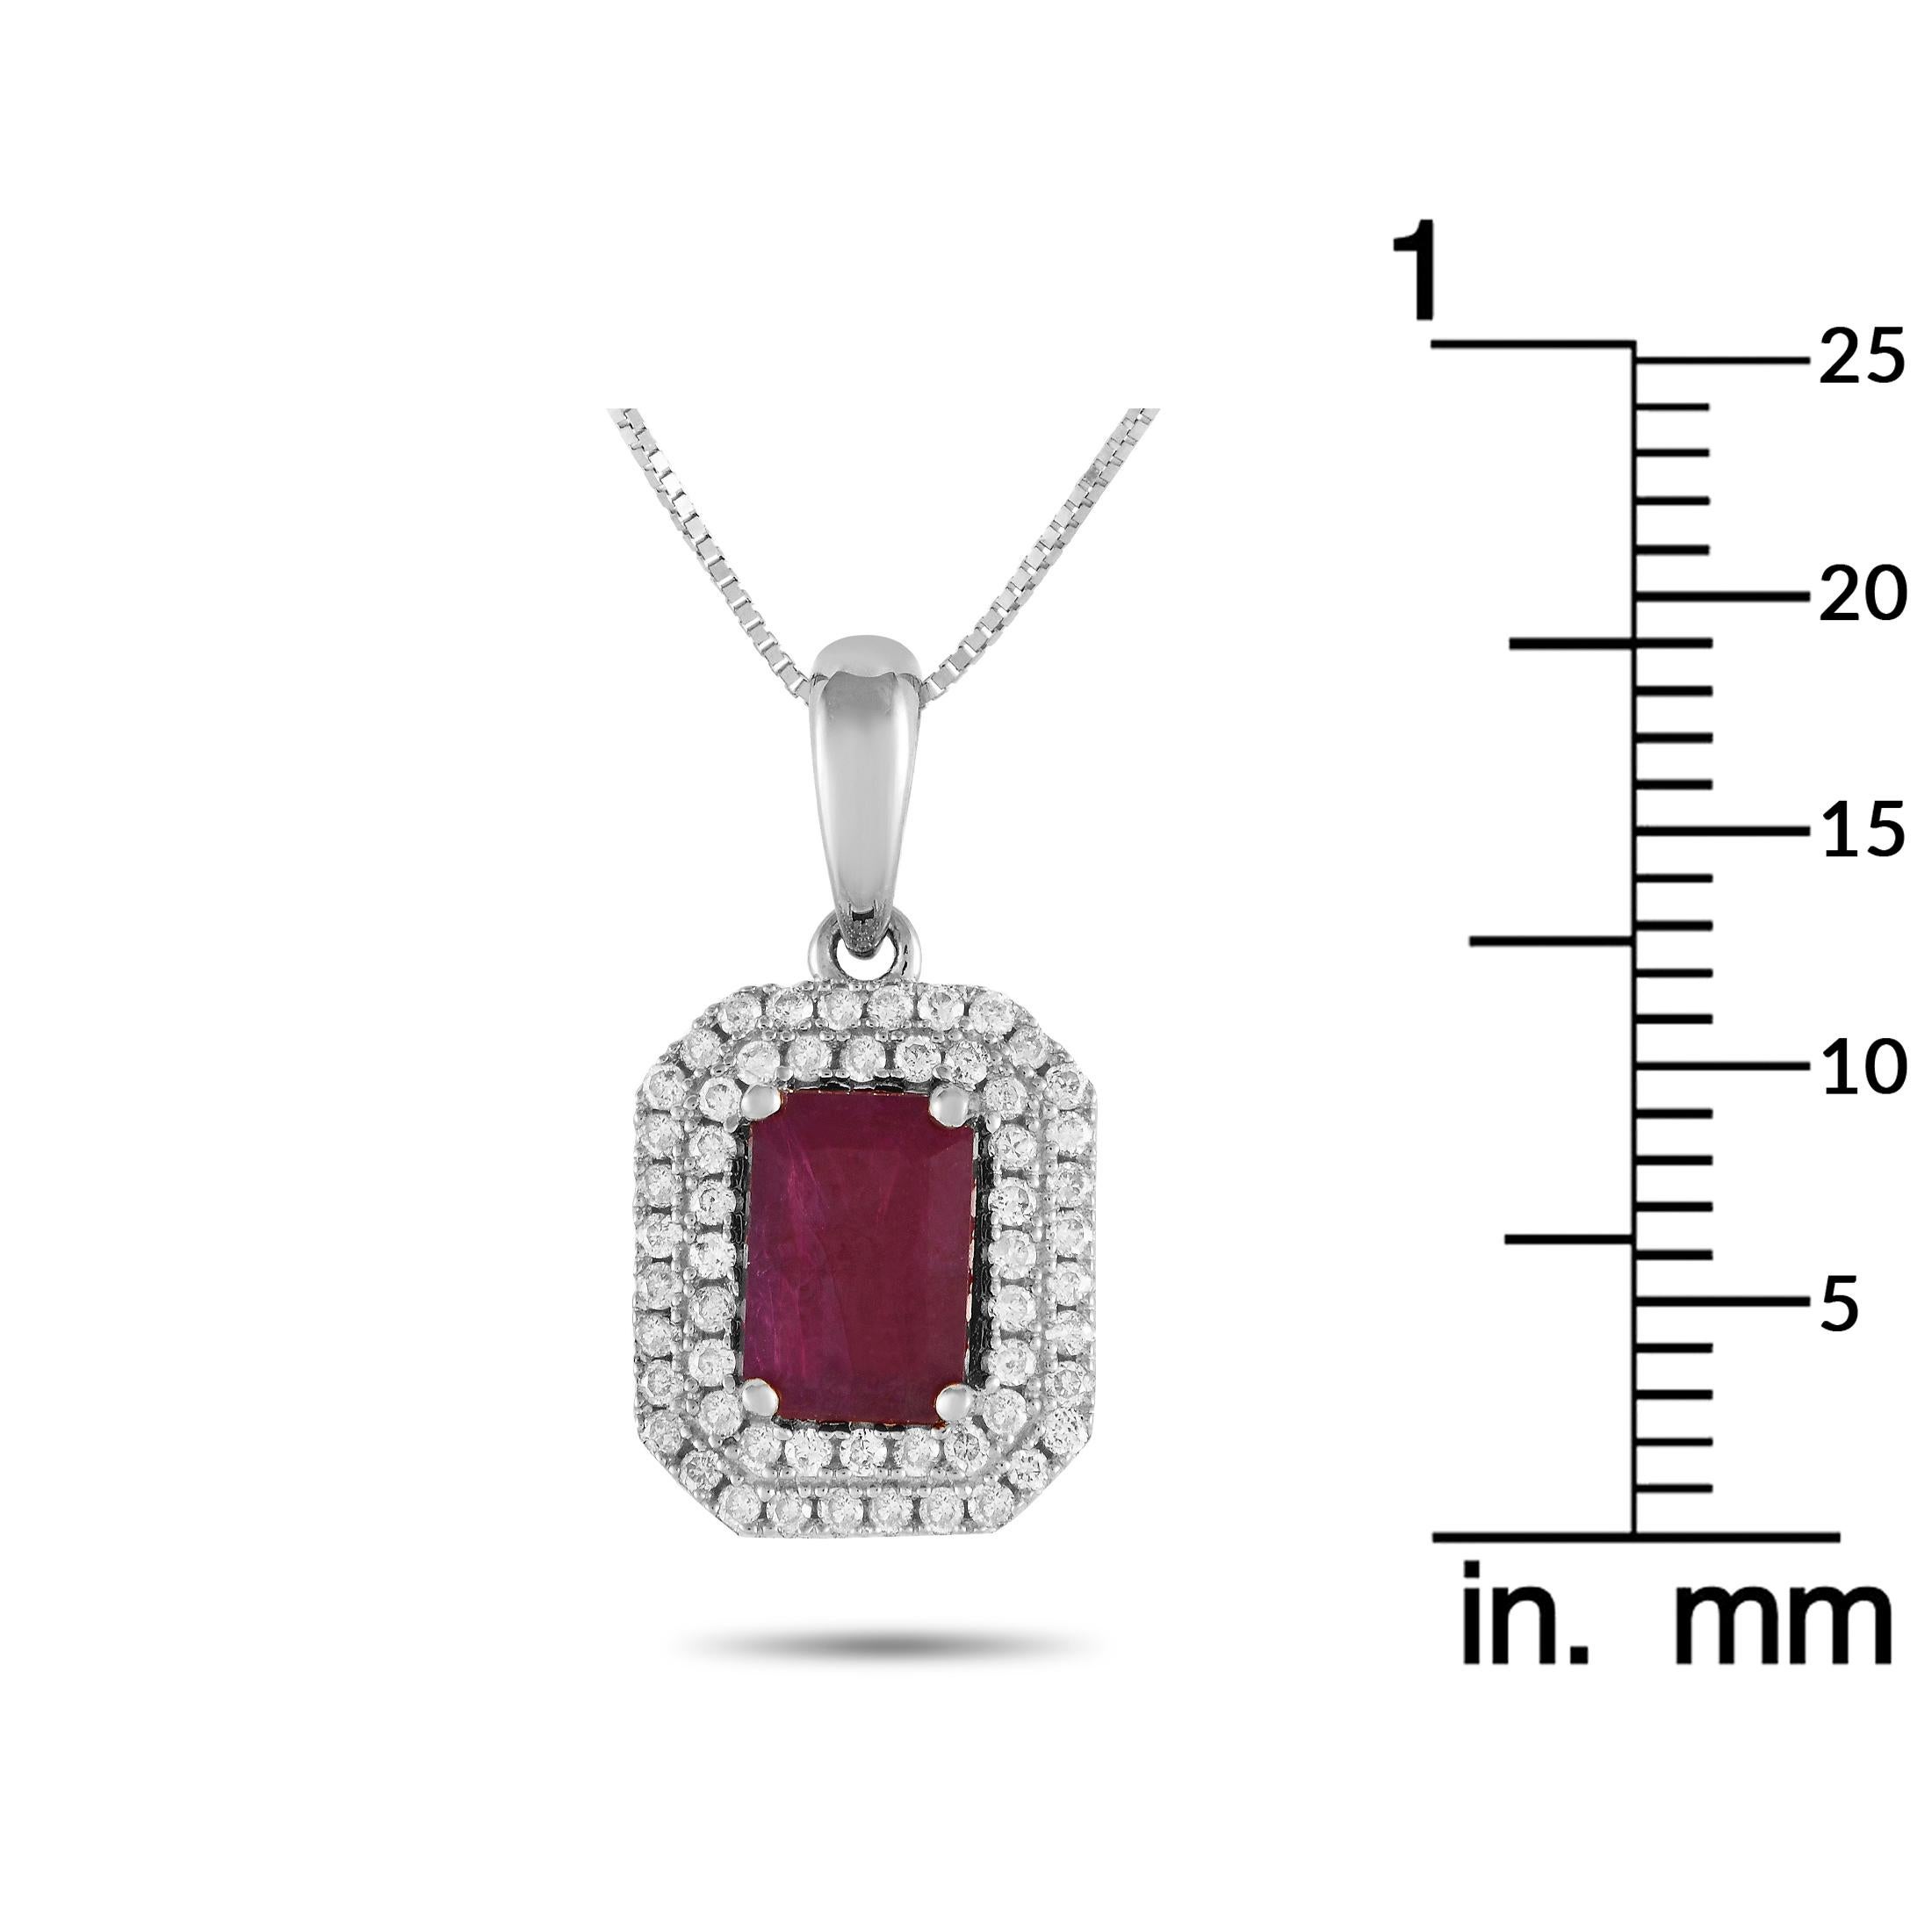 LB Exclusive 14K White Gold 0.24ct Diamond & Ruby Necklace PD4-15905WRU In New Condition For Sale In Southampton, PA